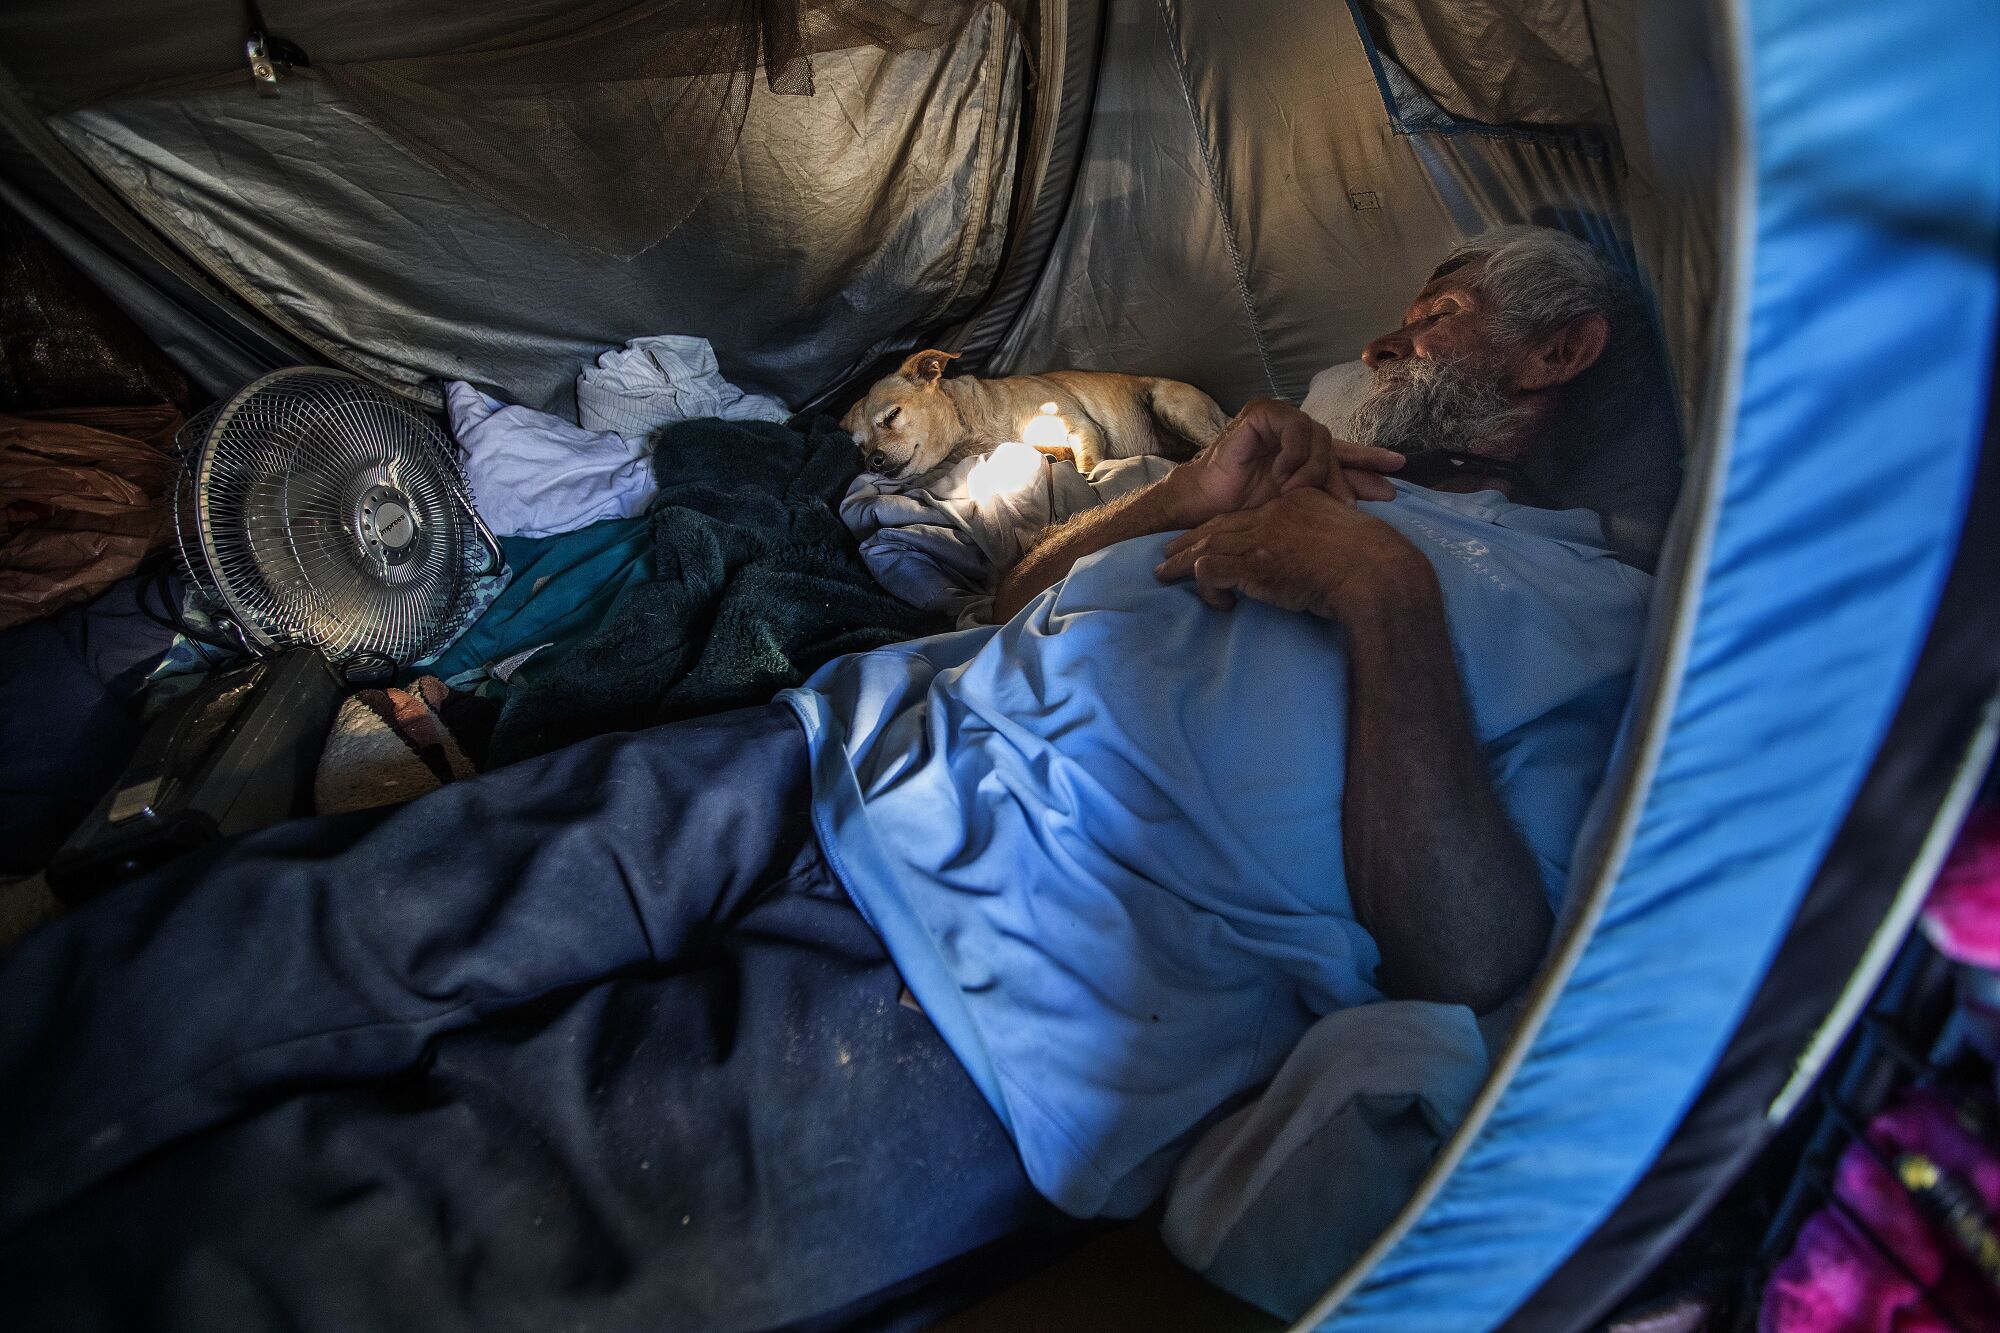 Augustine Hurtado, who has been homeless for the past three years, sleeps inside his tent in South Los Angeles.